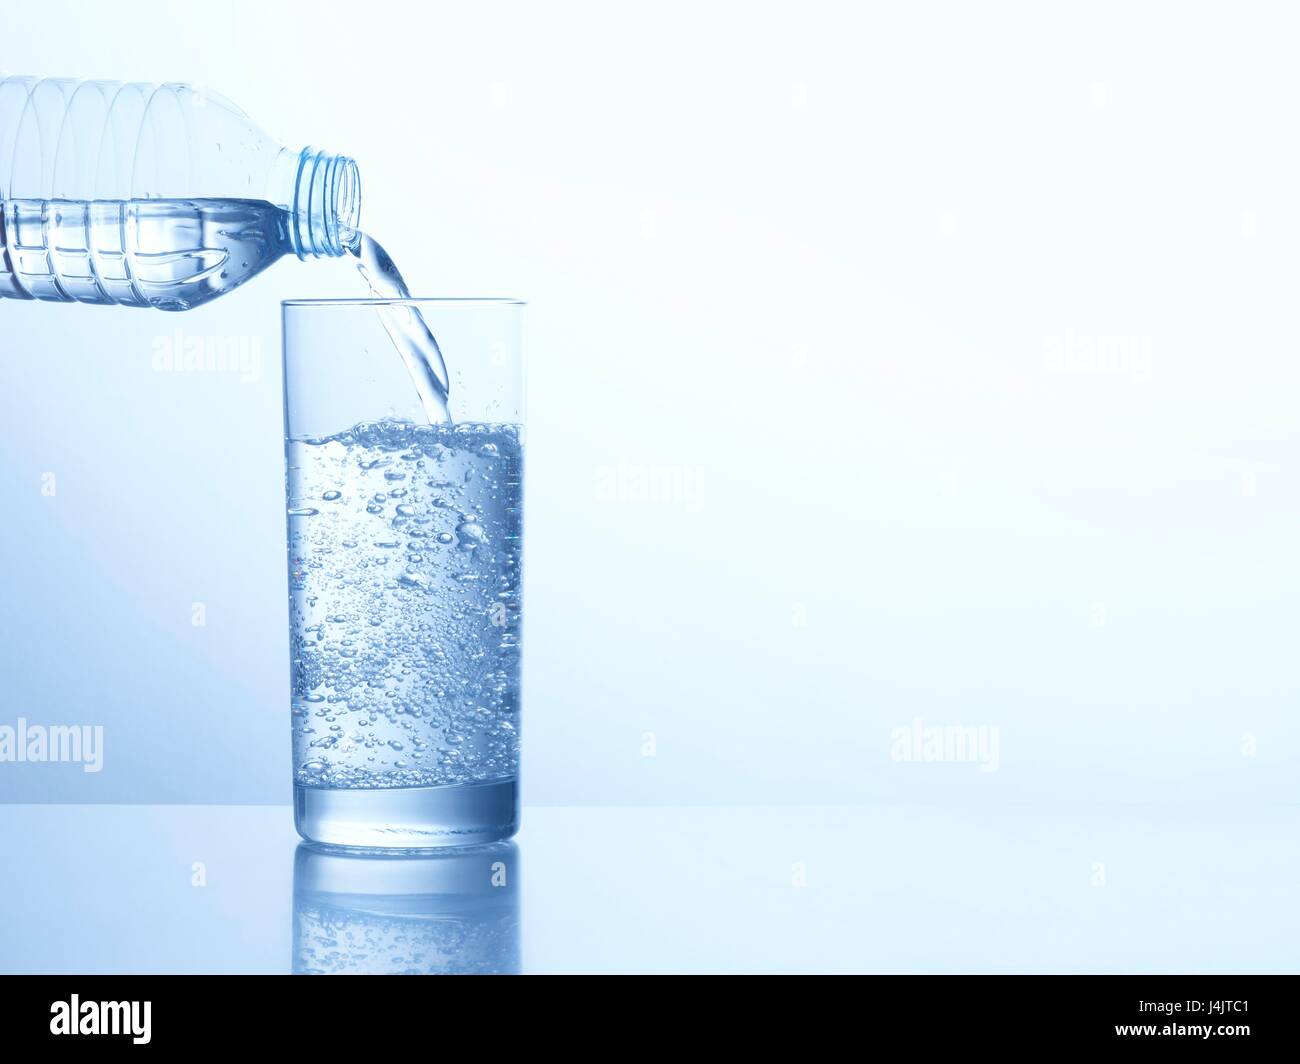 Pouring water from a bottle into a glass, studio shot. Stock Photo